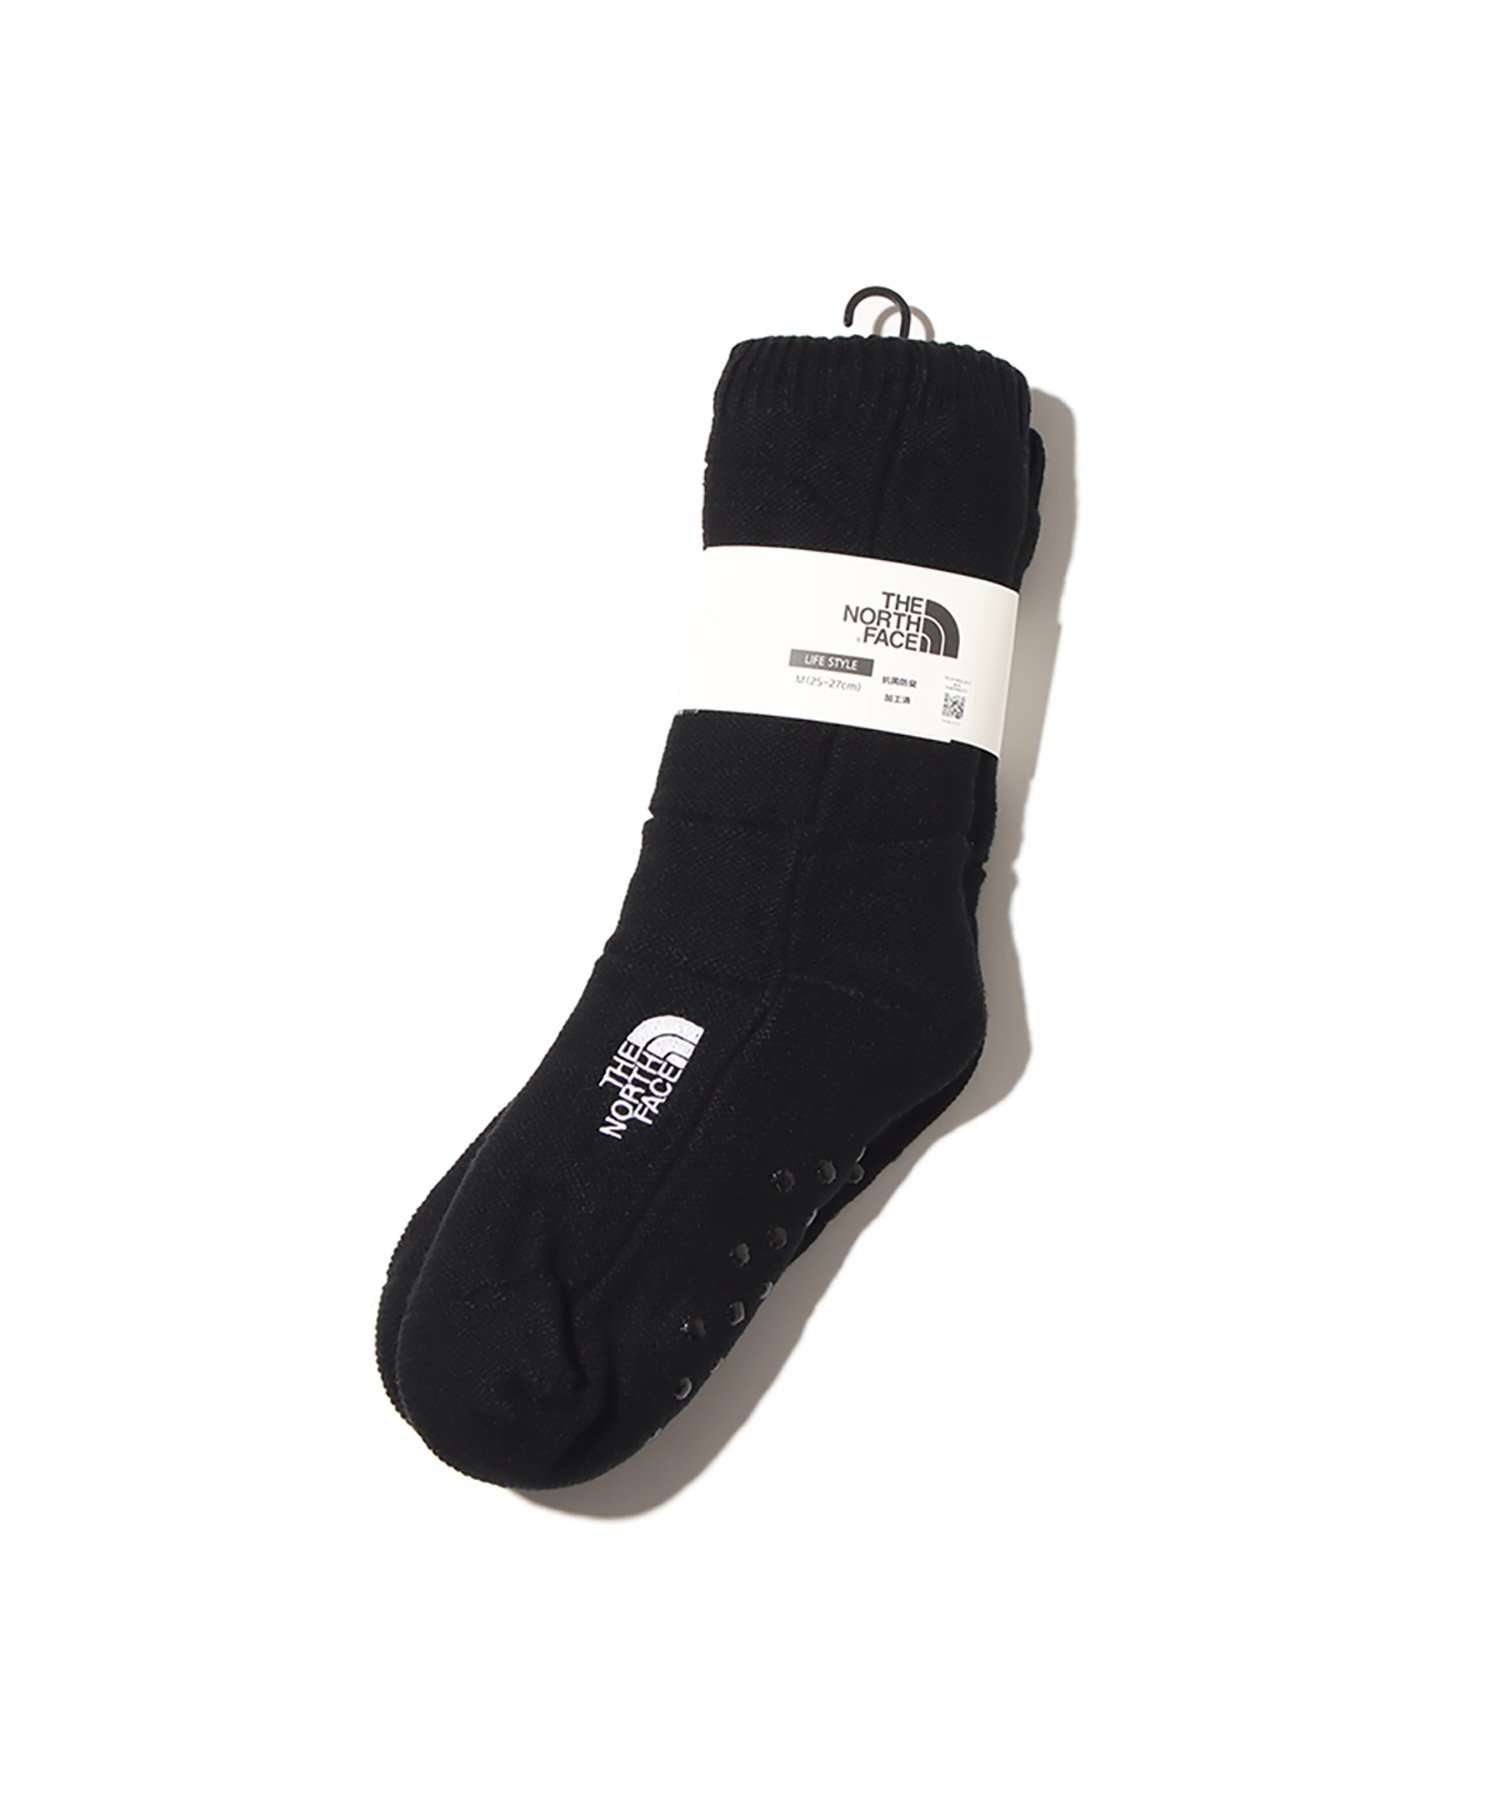 THE NORTH FACE THE NORTH FACE NUPTSE BOOTIE SOCKS アトモスピンク 靴下・レッグウェア その他の靴下・レッグウェア ブラック